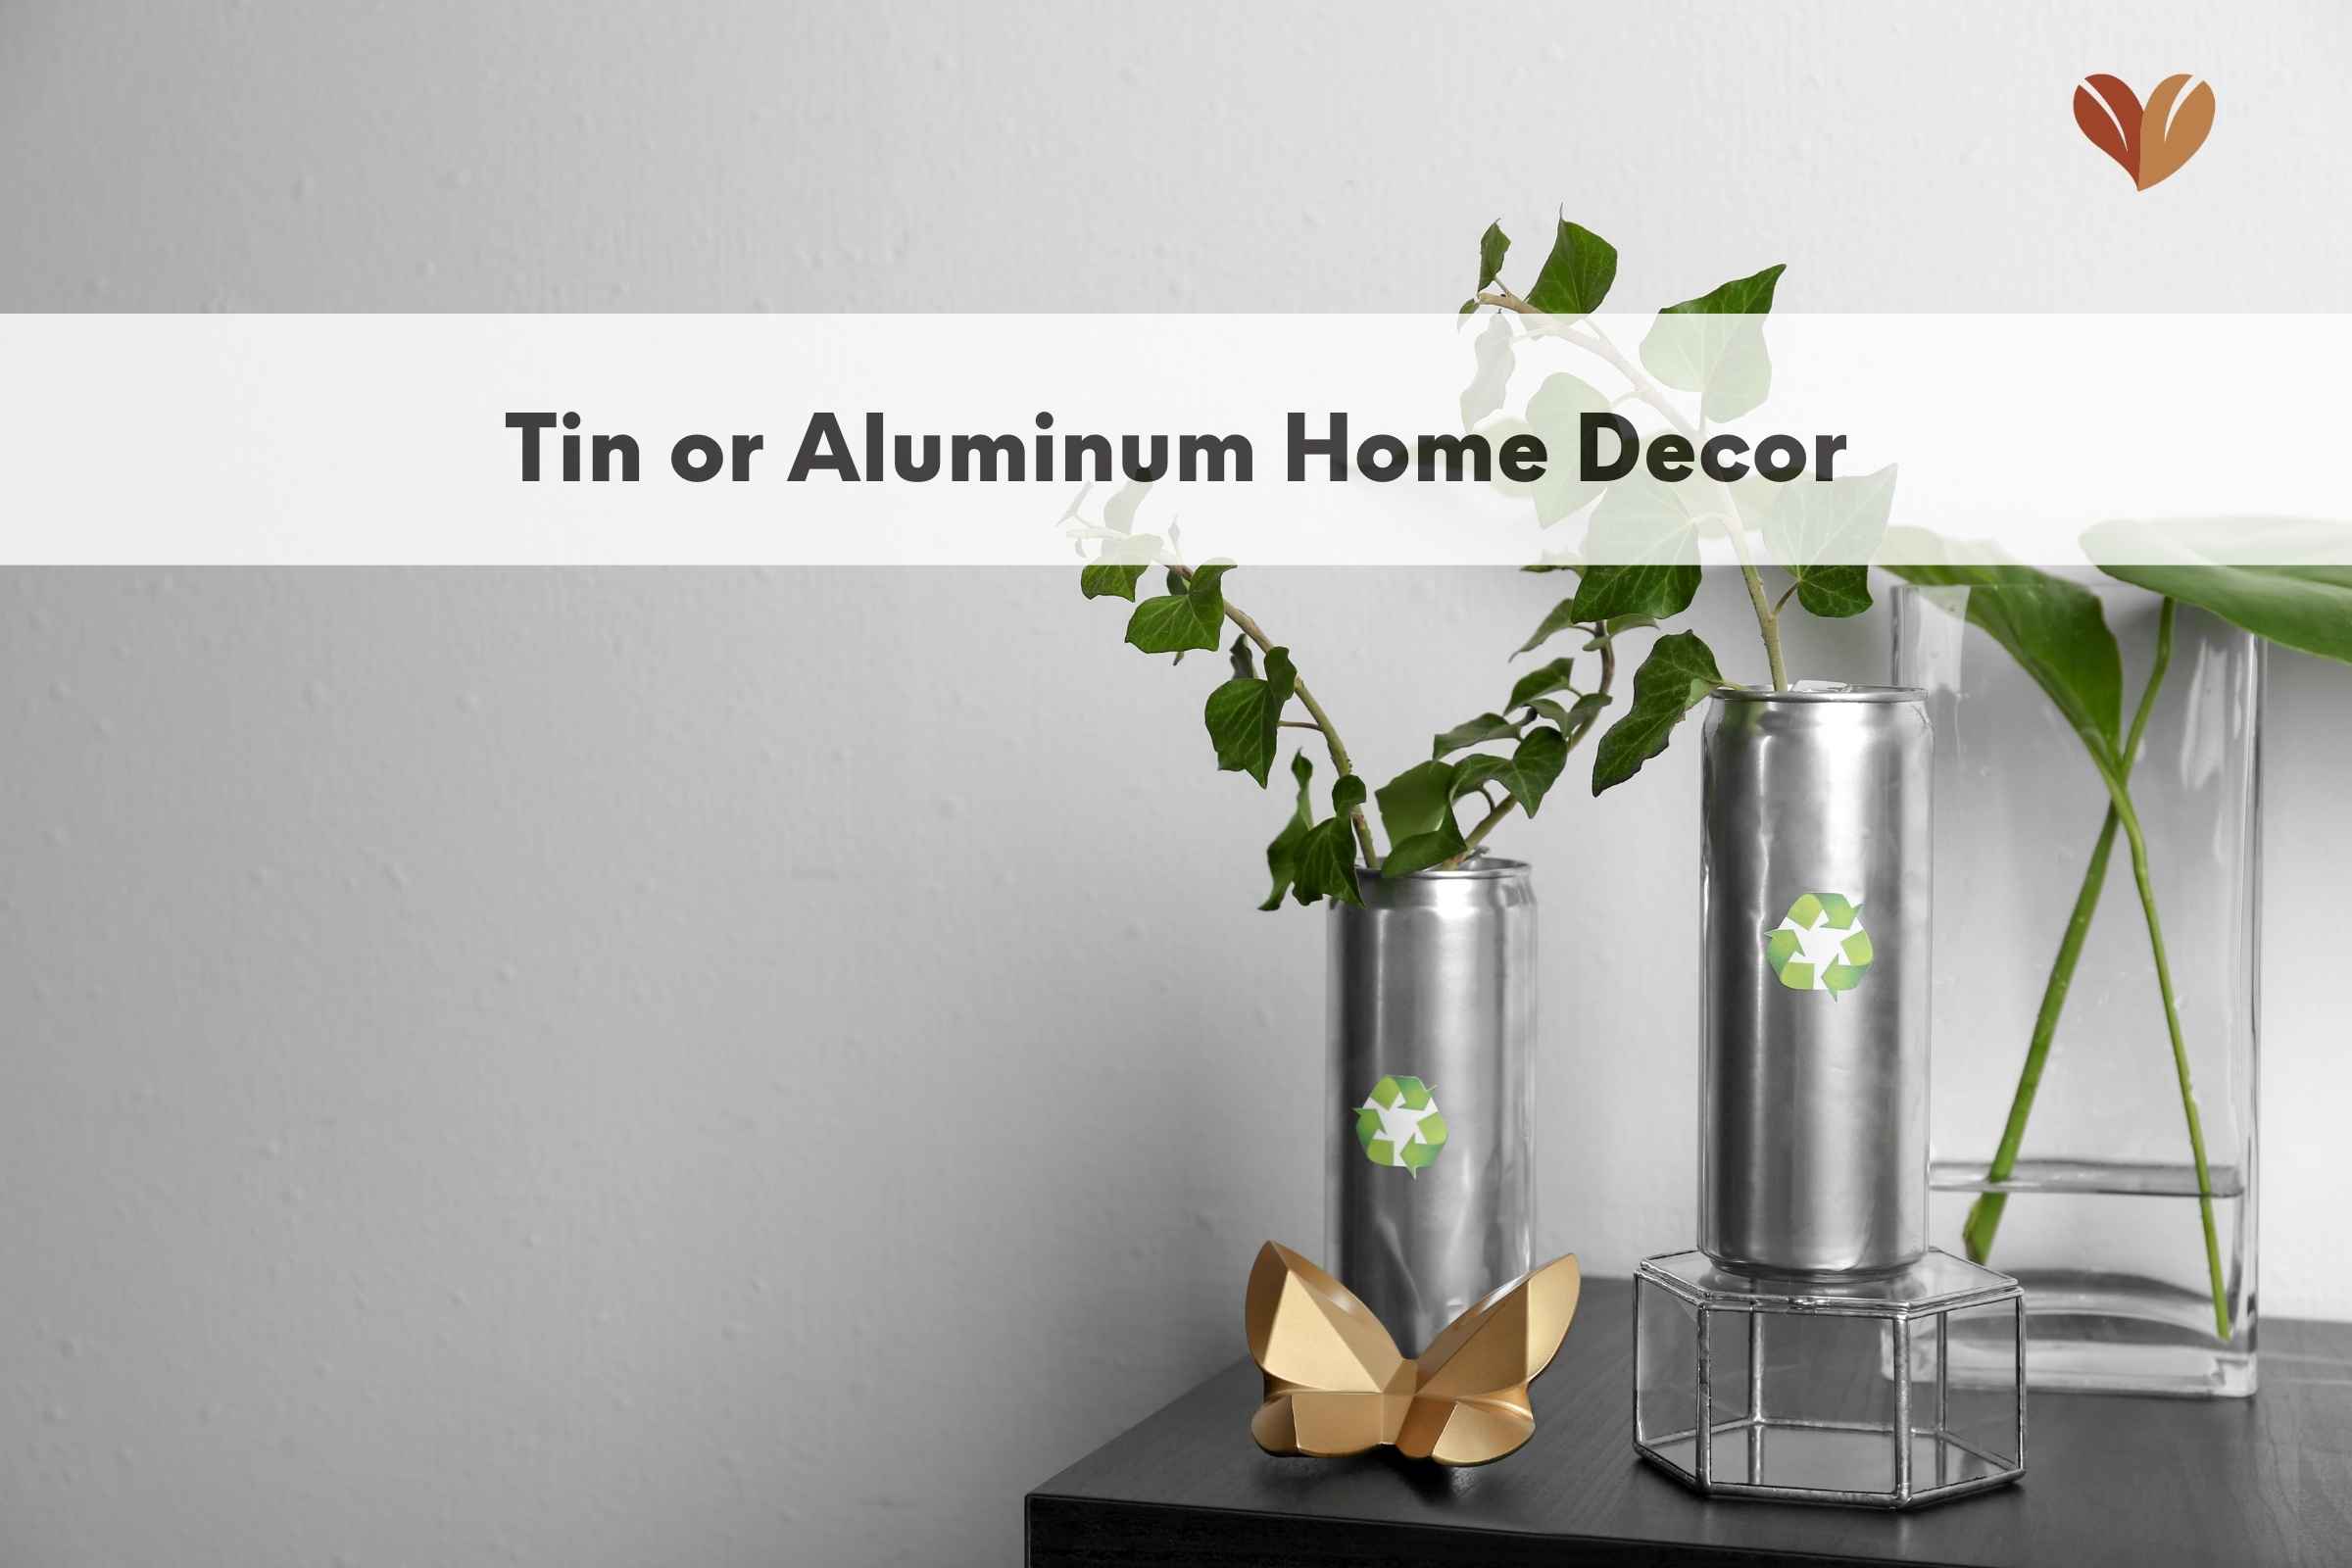 Tin or Aluminum Home Decor - 10-year anniversary gifts for her